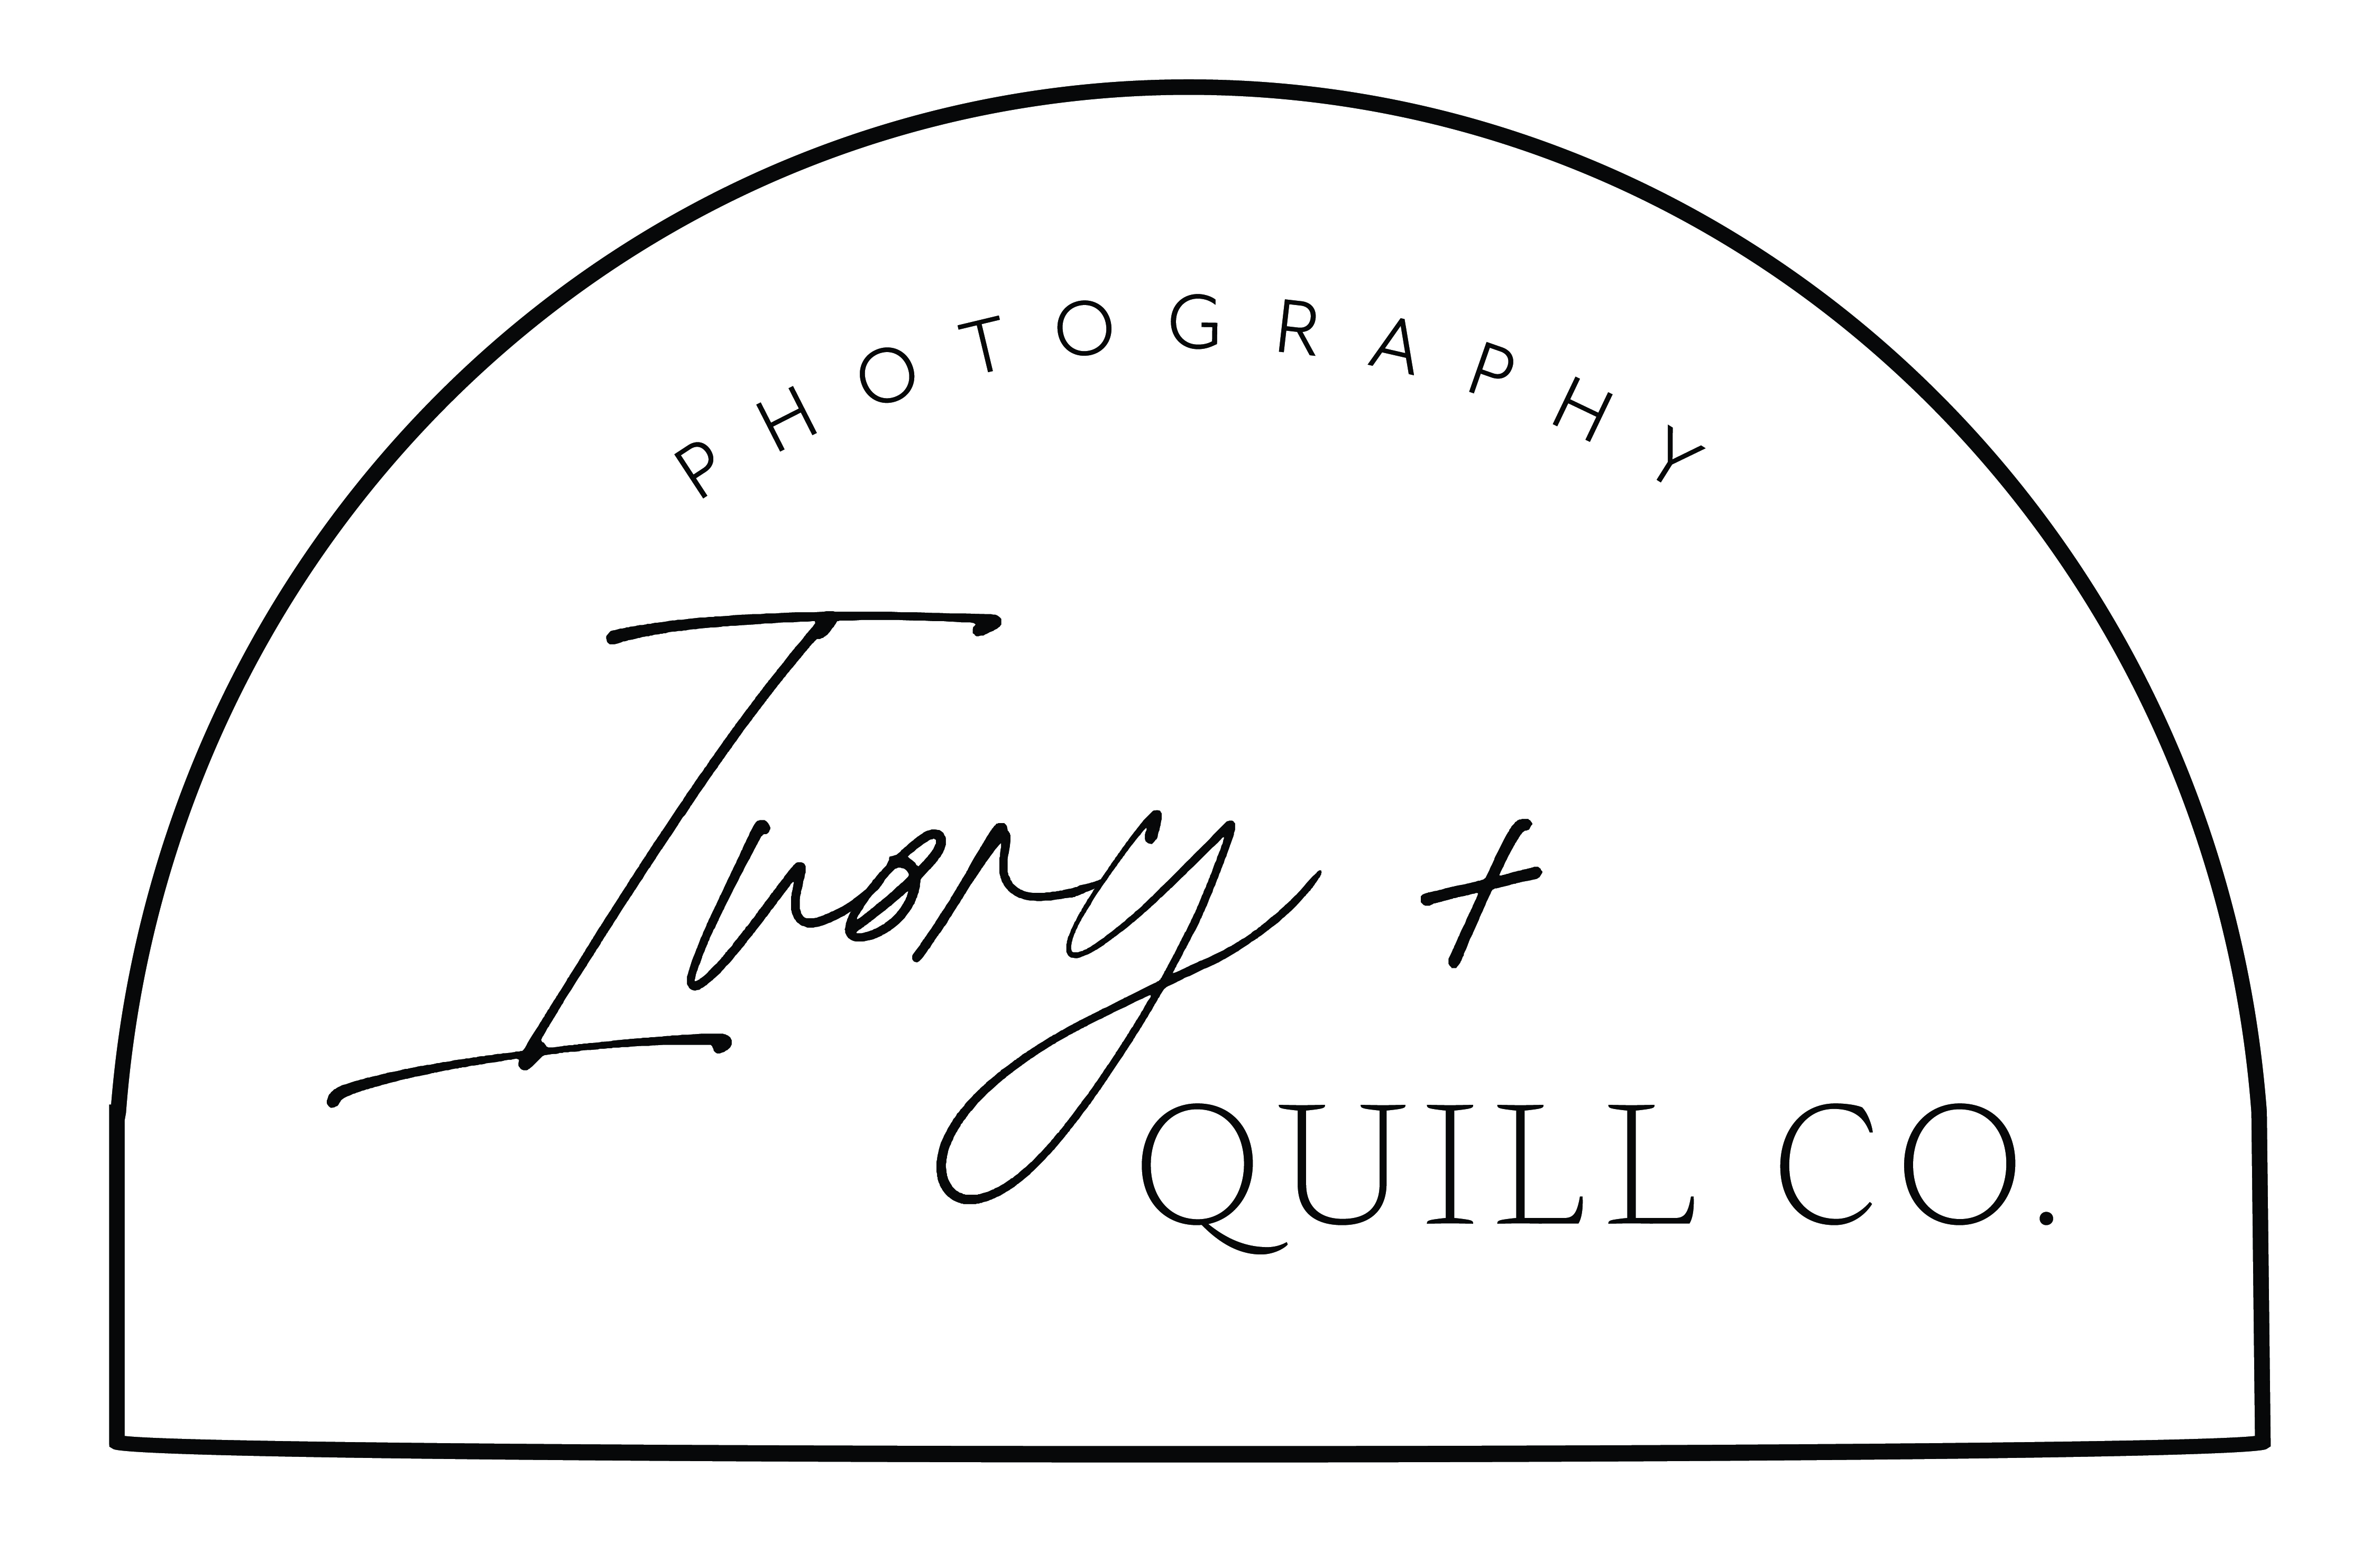 Ivory + Quill Co.